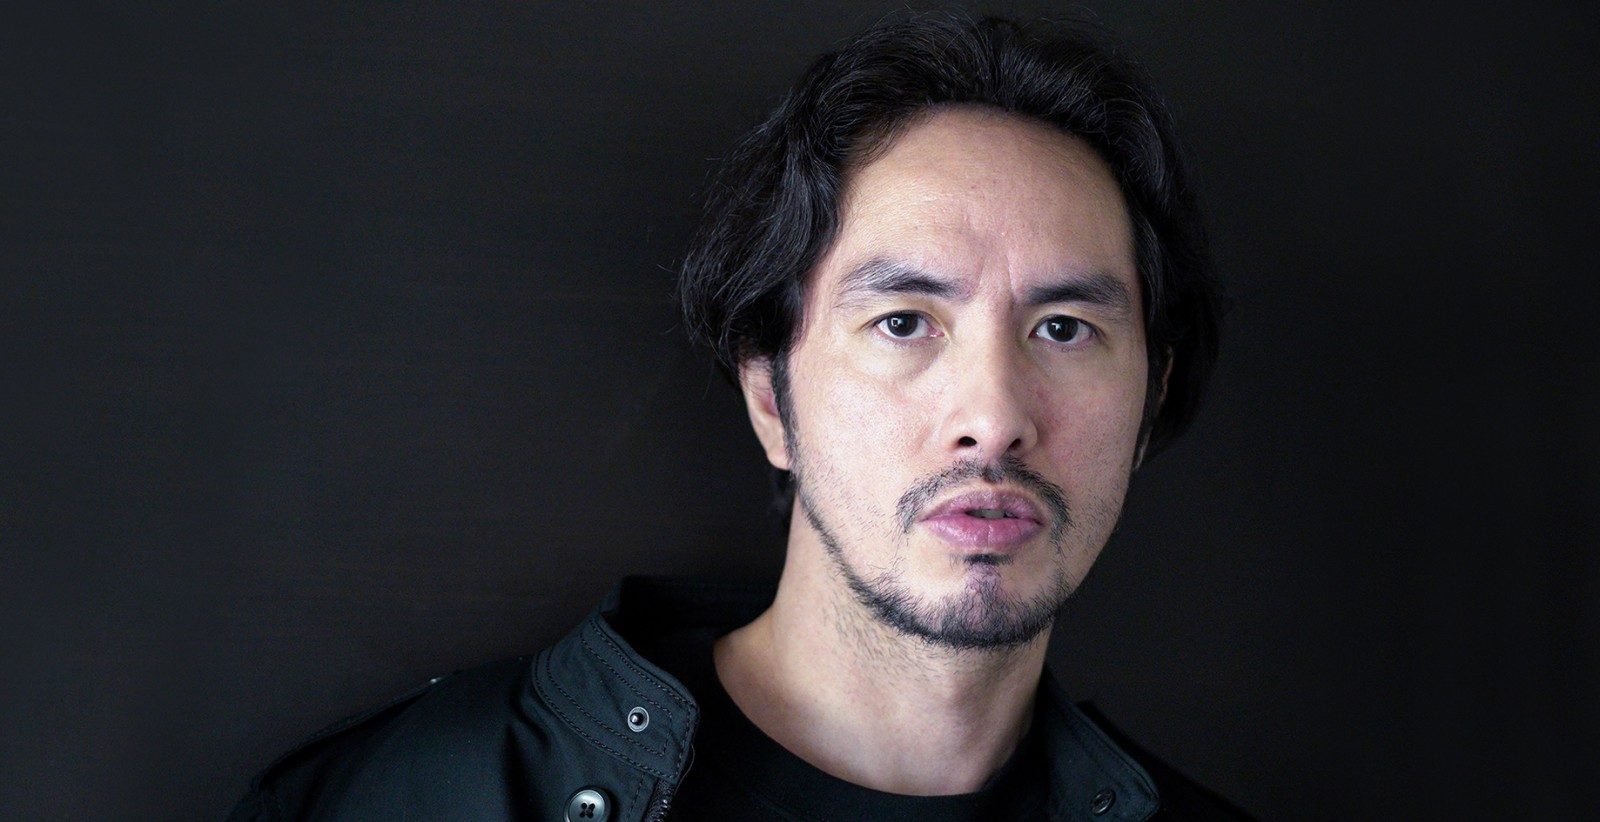 LISTEN: ‘This Too Shall Pass,’ Rico Blanco’s first solo single in 4 years